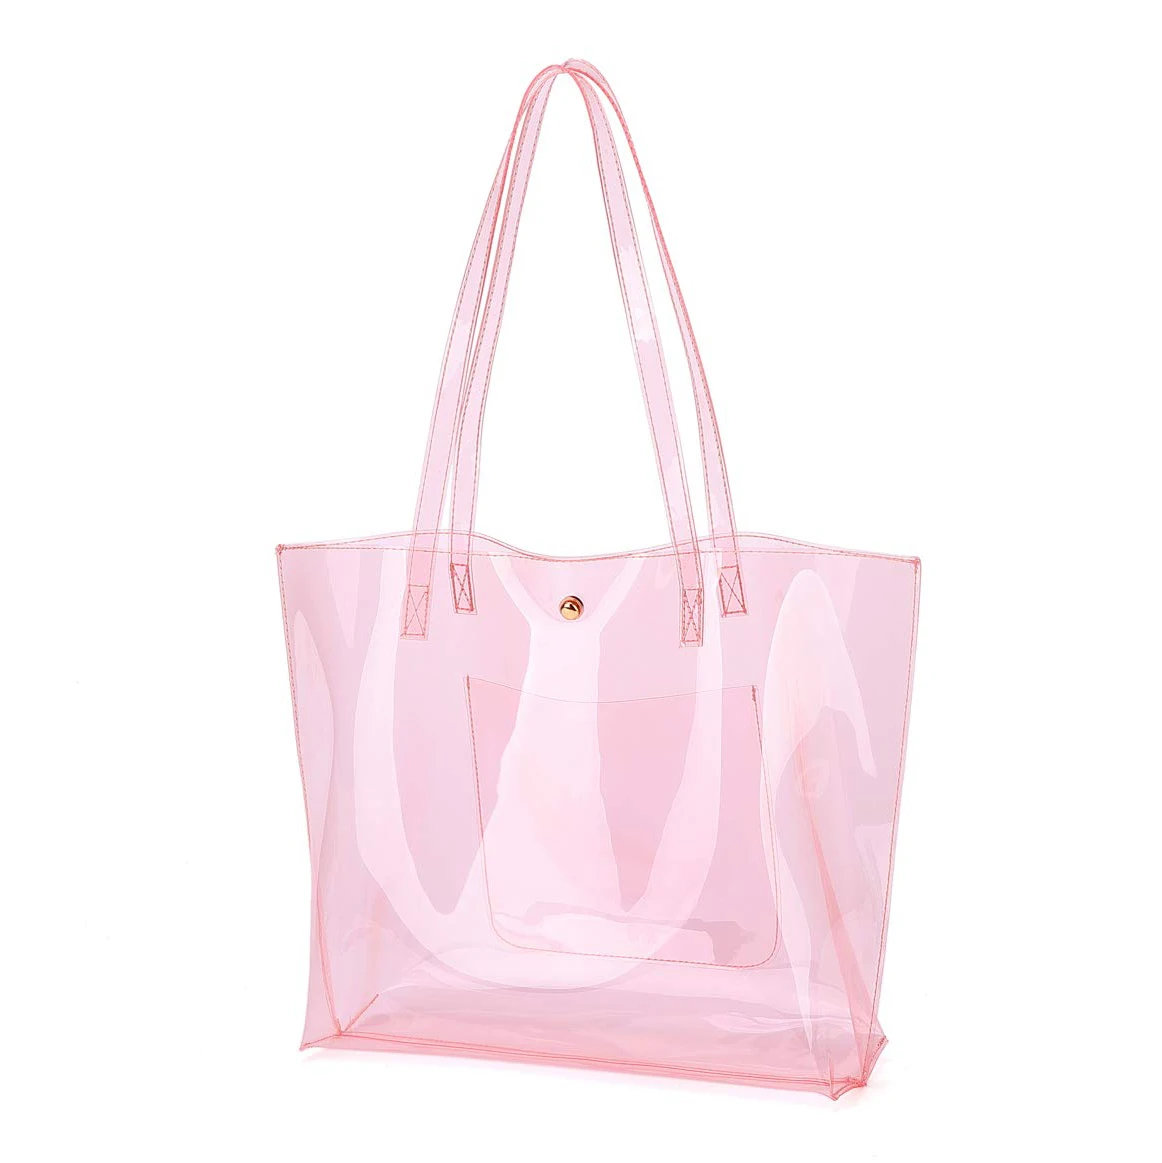 Source Printed Waterproof Transparent Pvc Tote Bag Clear Jelly Shopping Bag  on m.